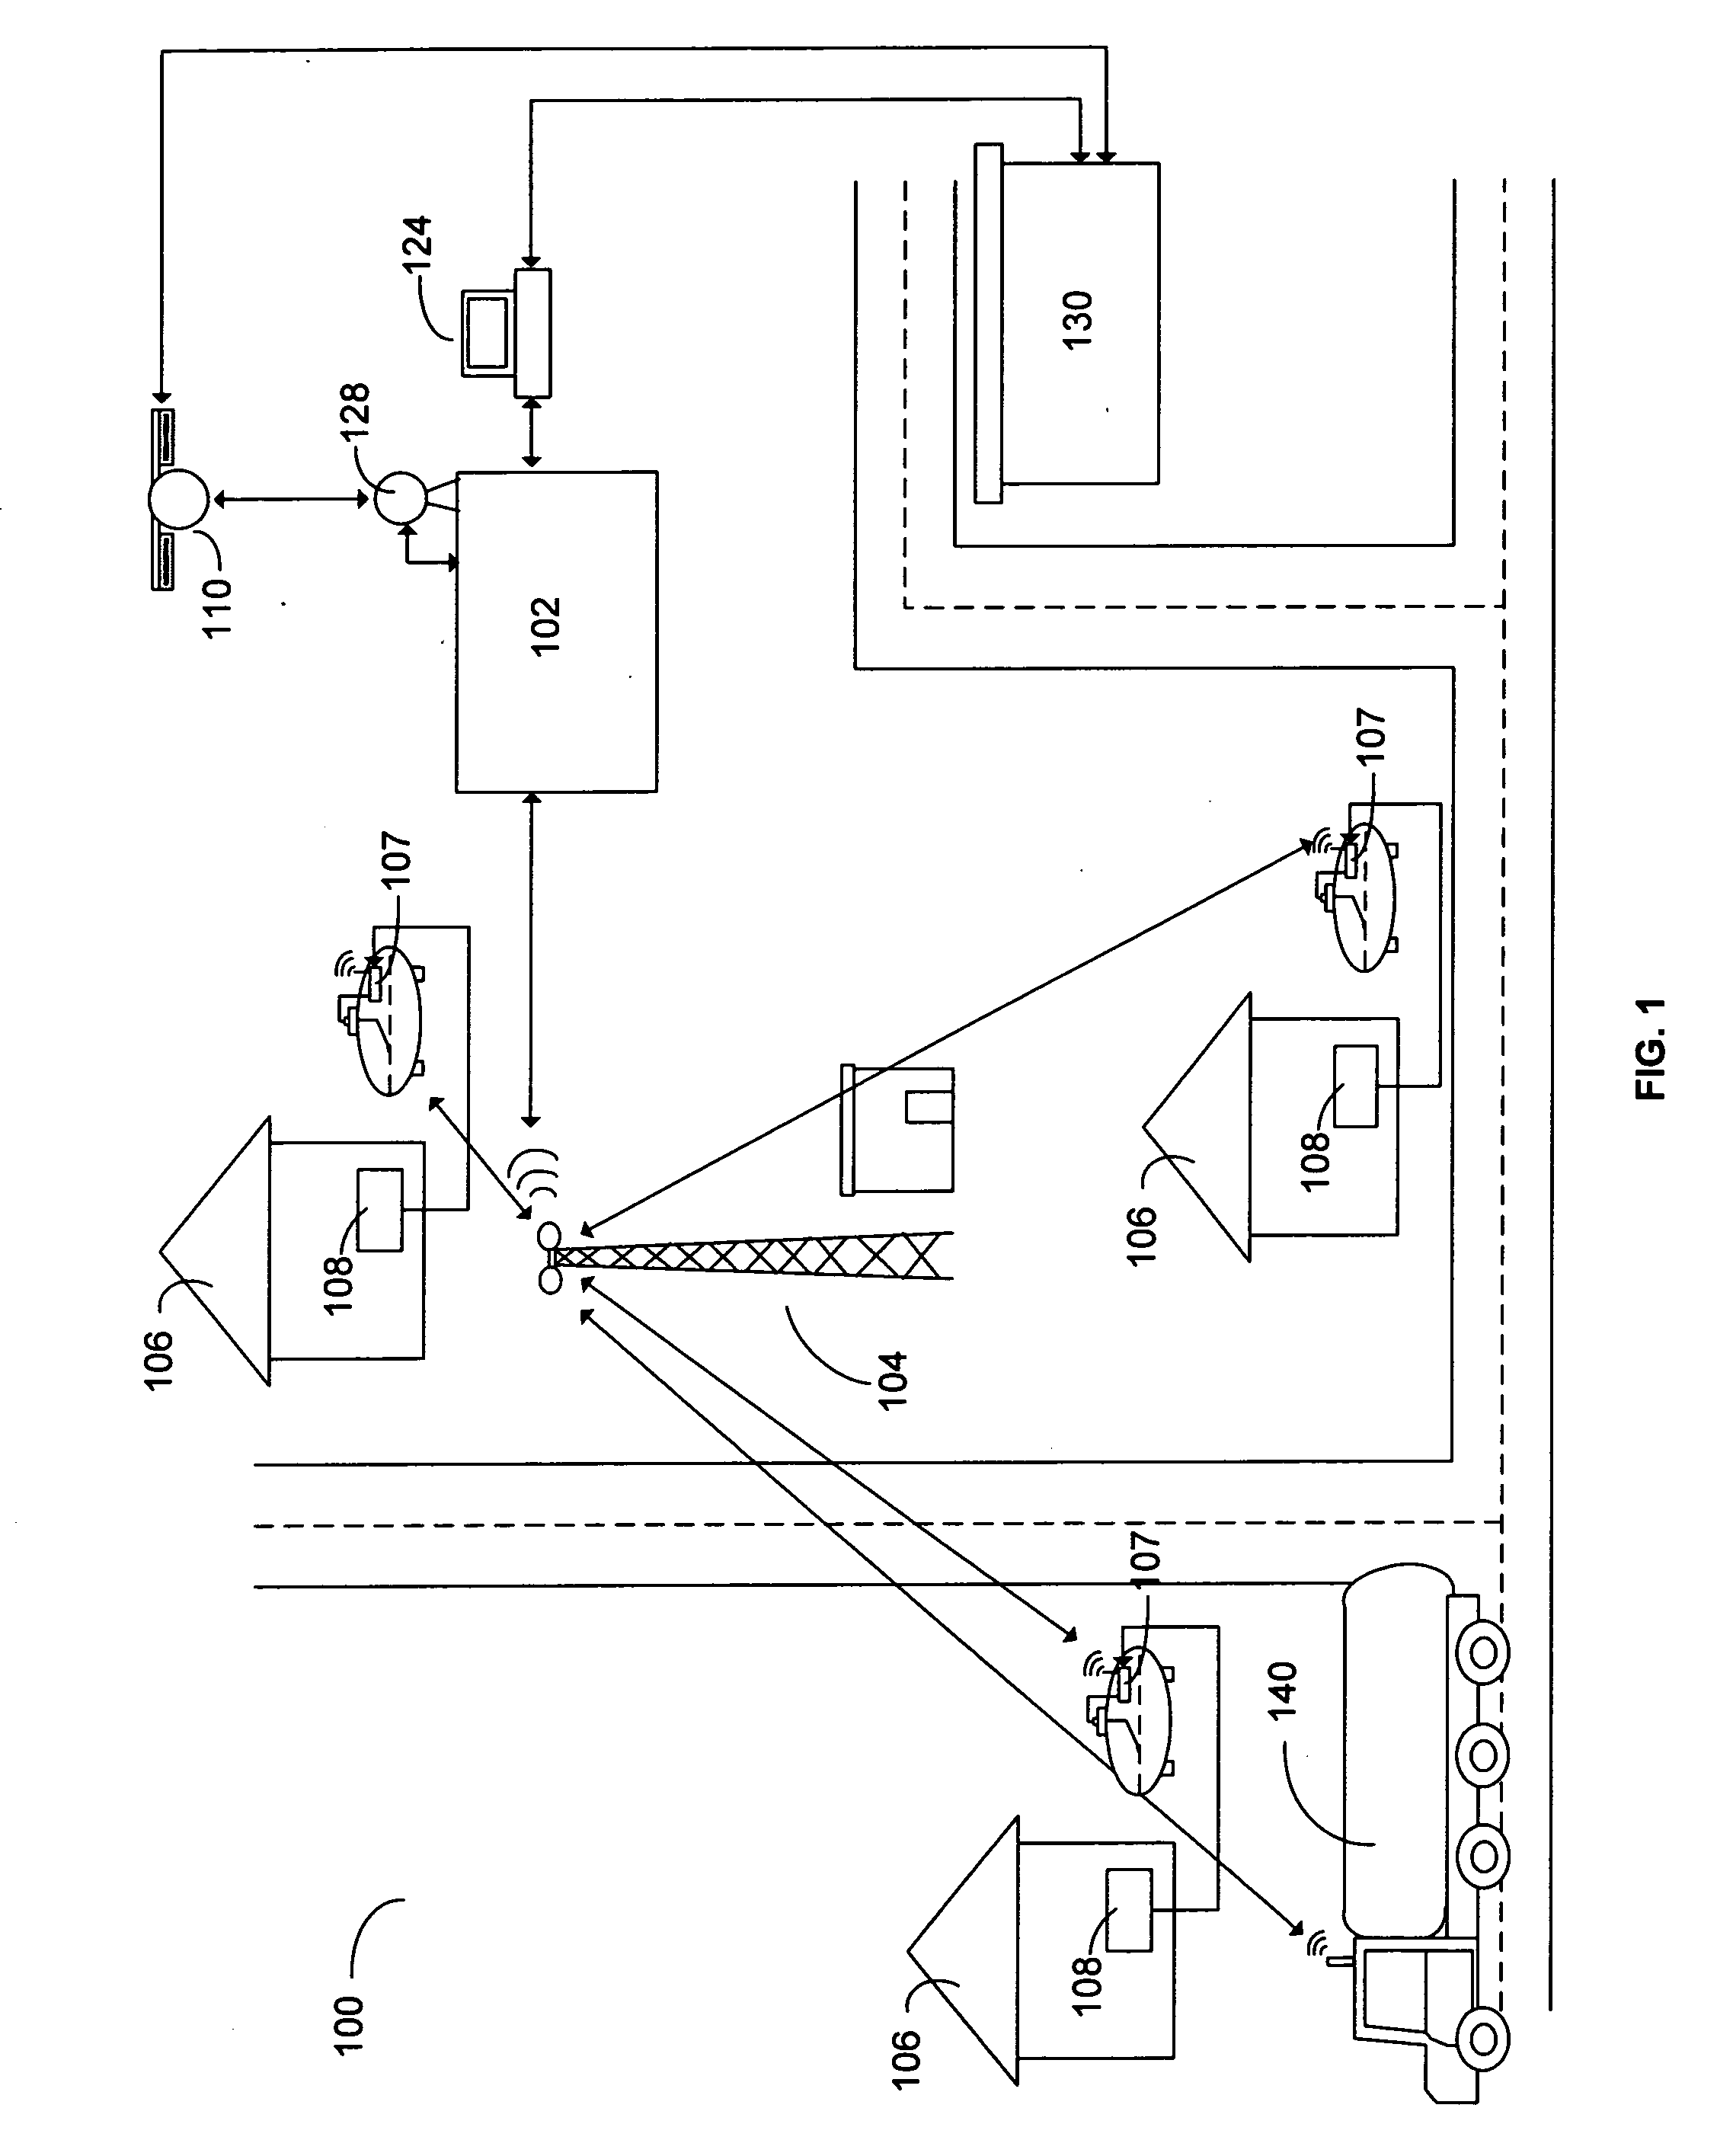 System for delivering propane or other consumable liquid to remotely located storage tanks